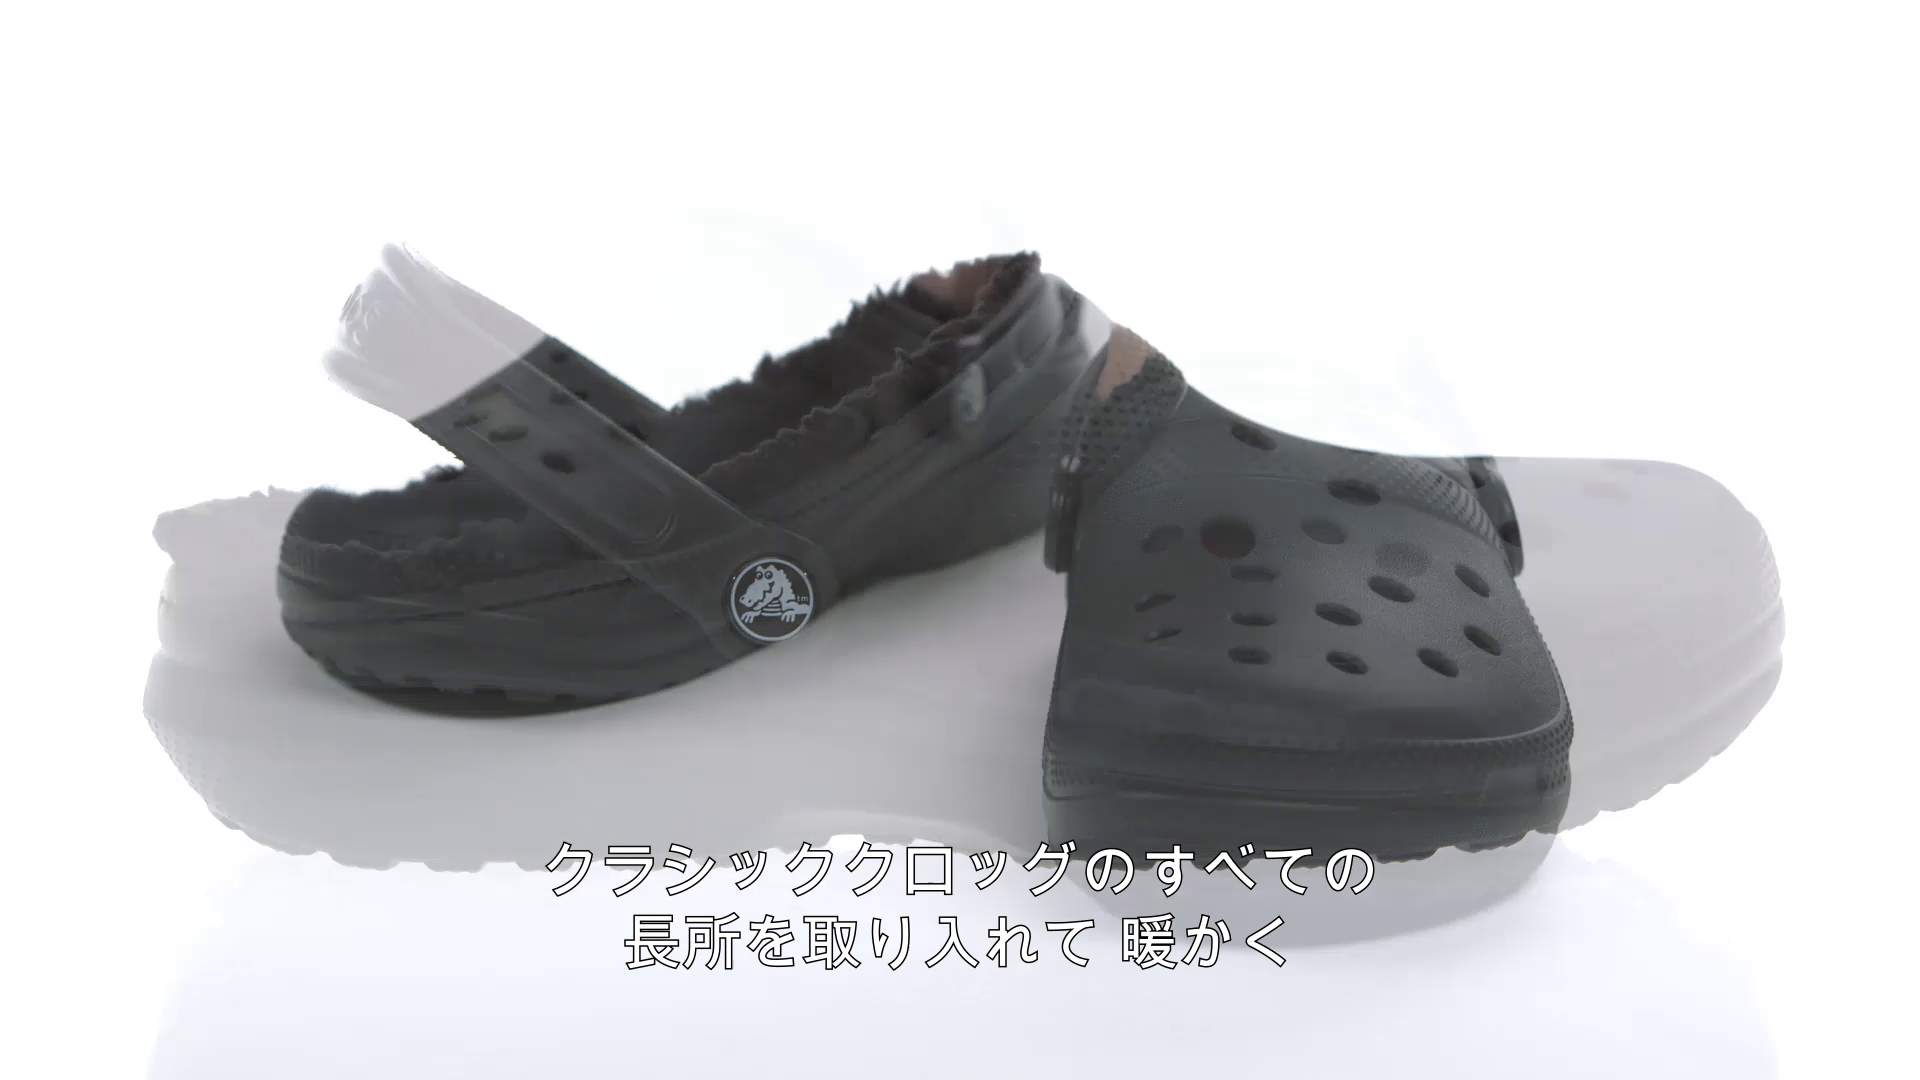 crocs with wool lining